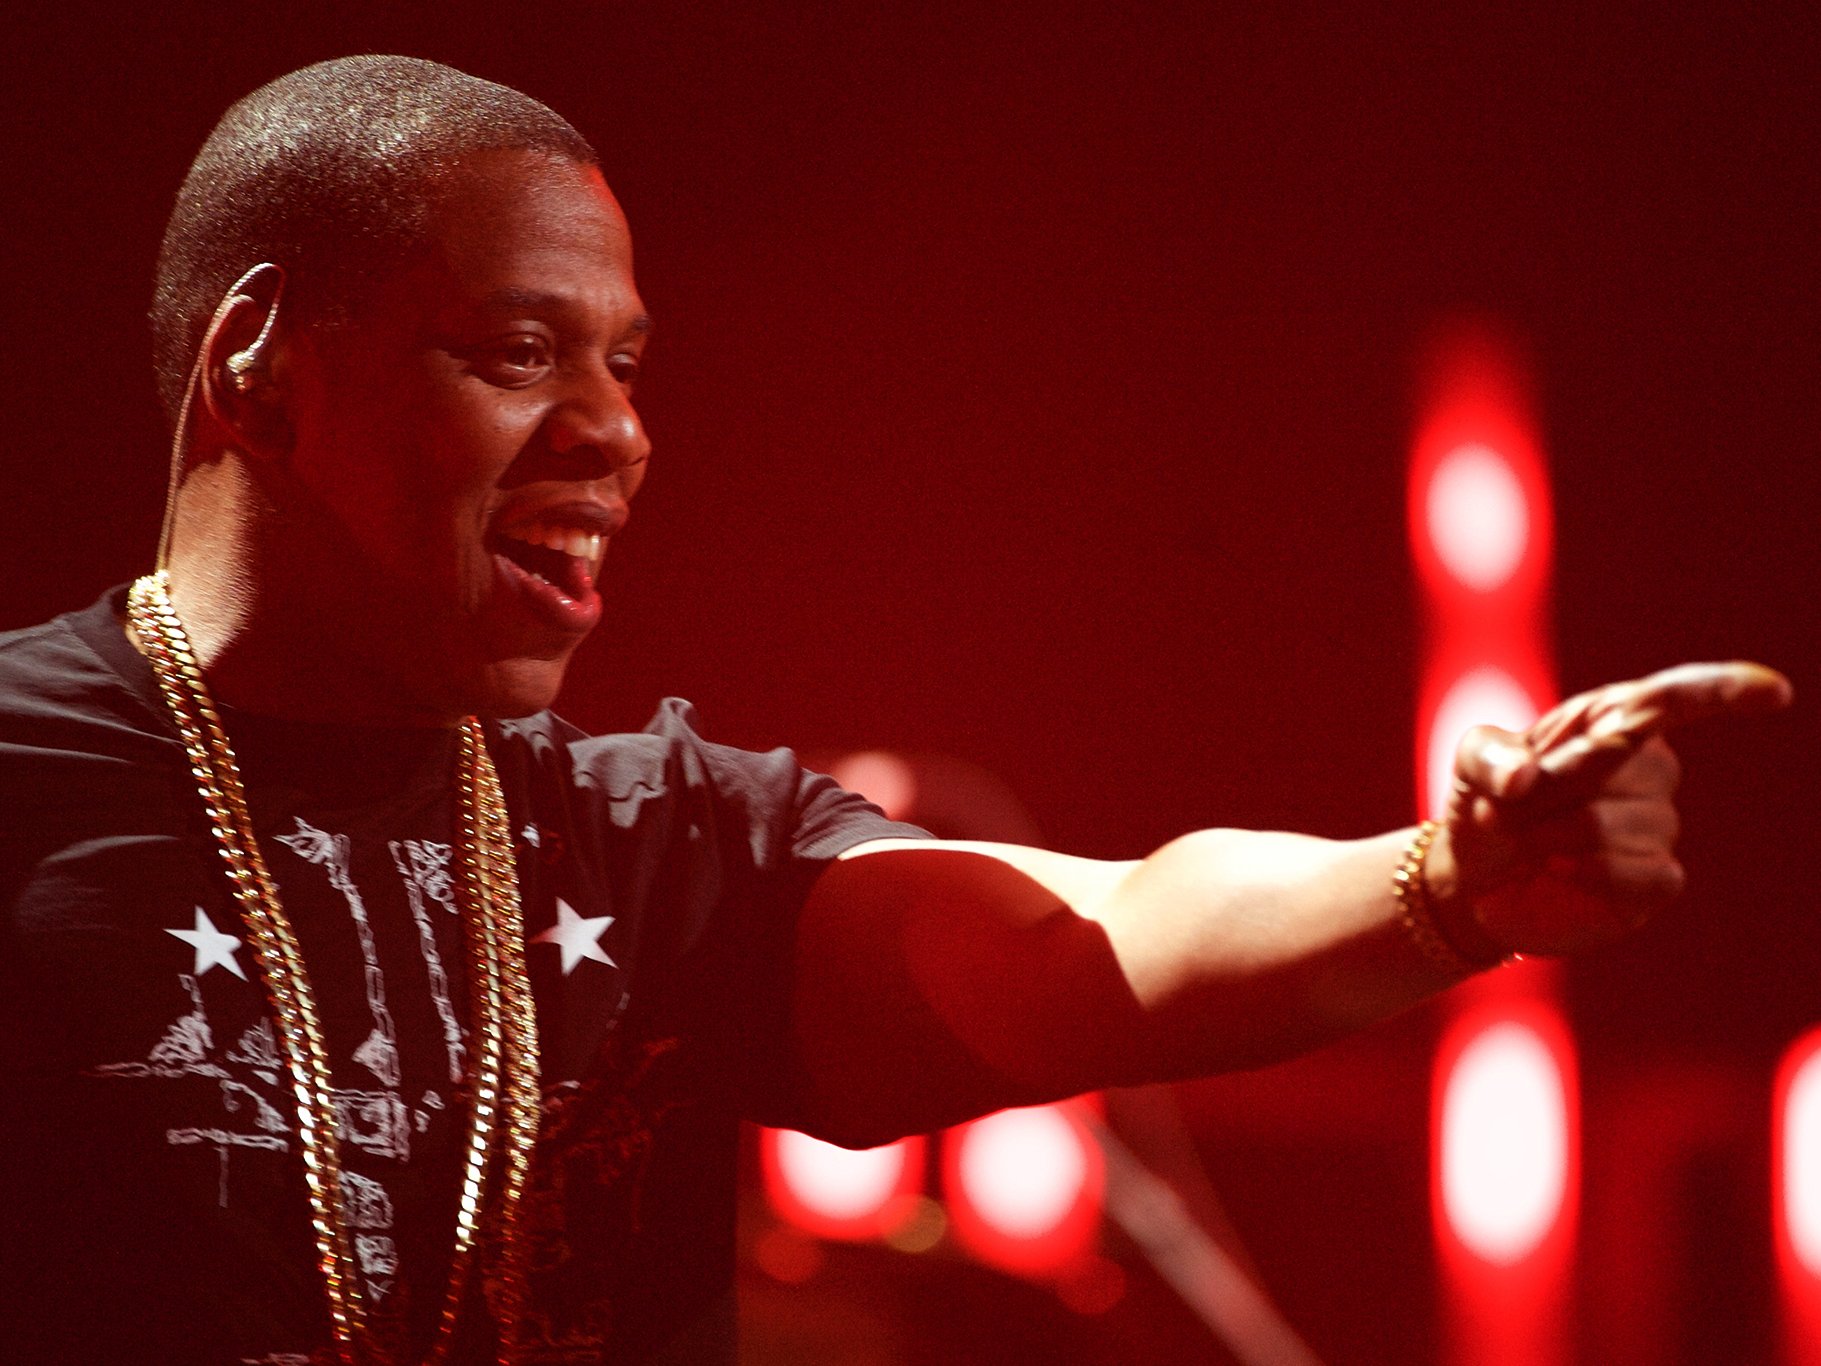 Jay-Z performs at a mMusic festival in 2011.